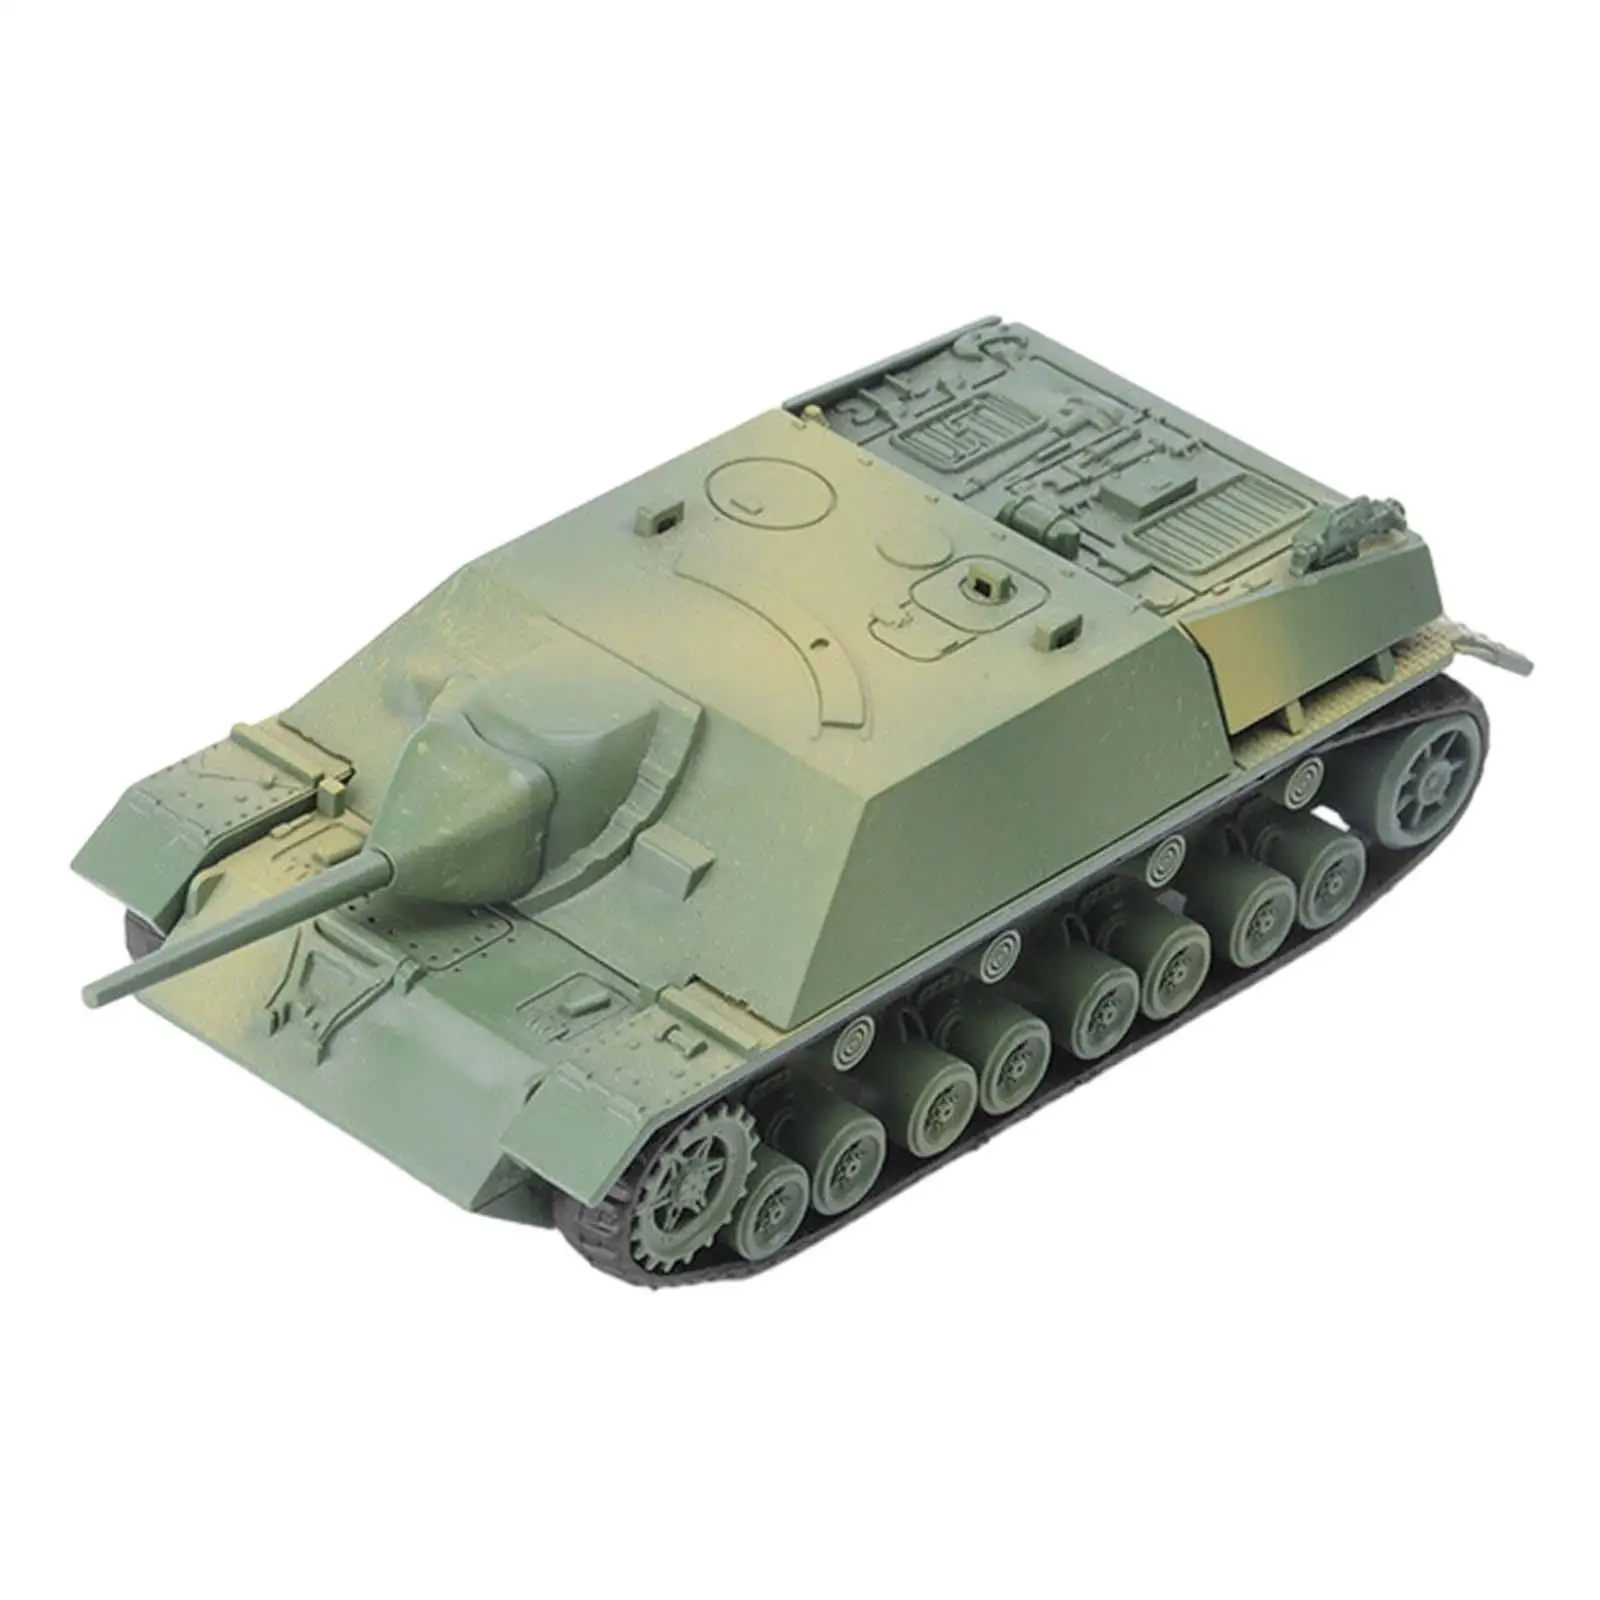 1/72 Scale Armored Tank Model Self Assembled Building Model Armored Vehicle for Party Favors Kids Gift Children Collectibles